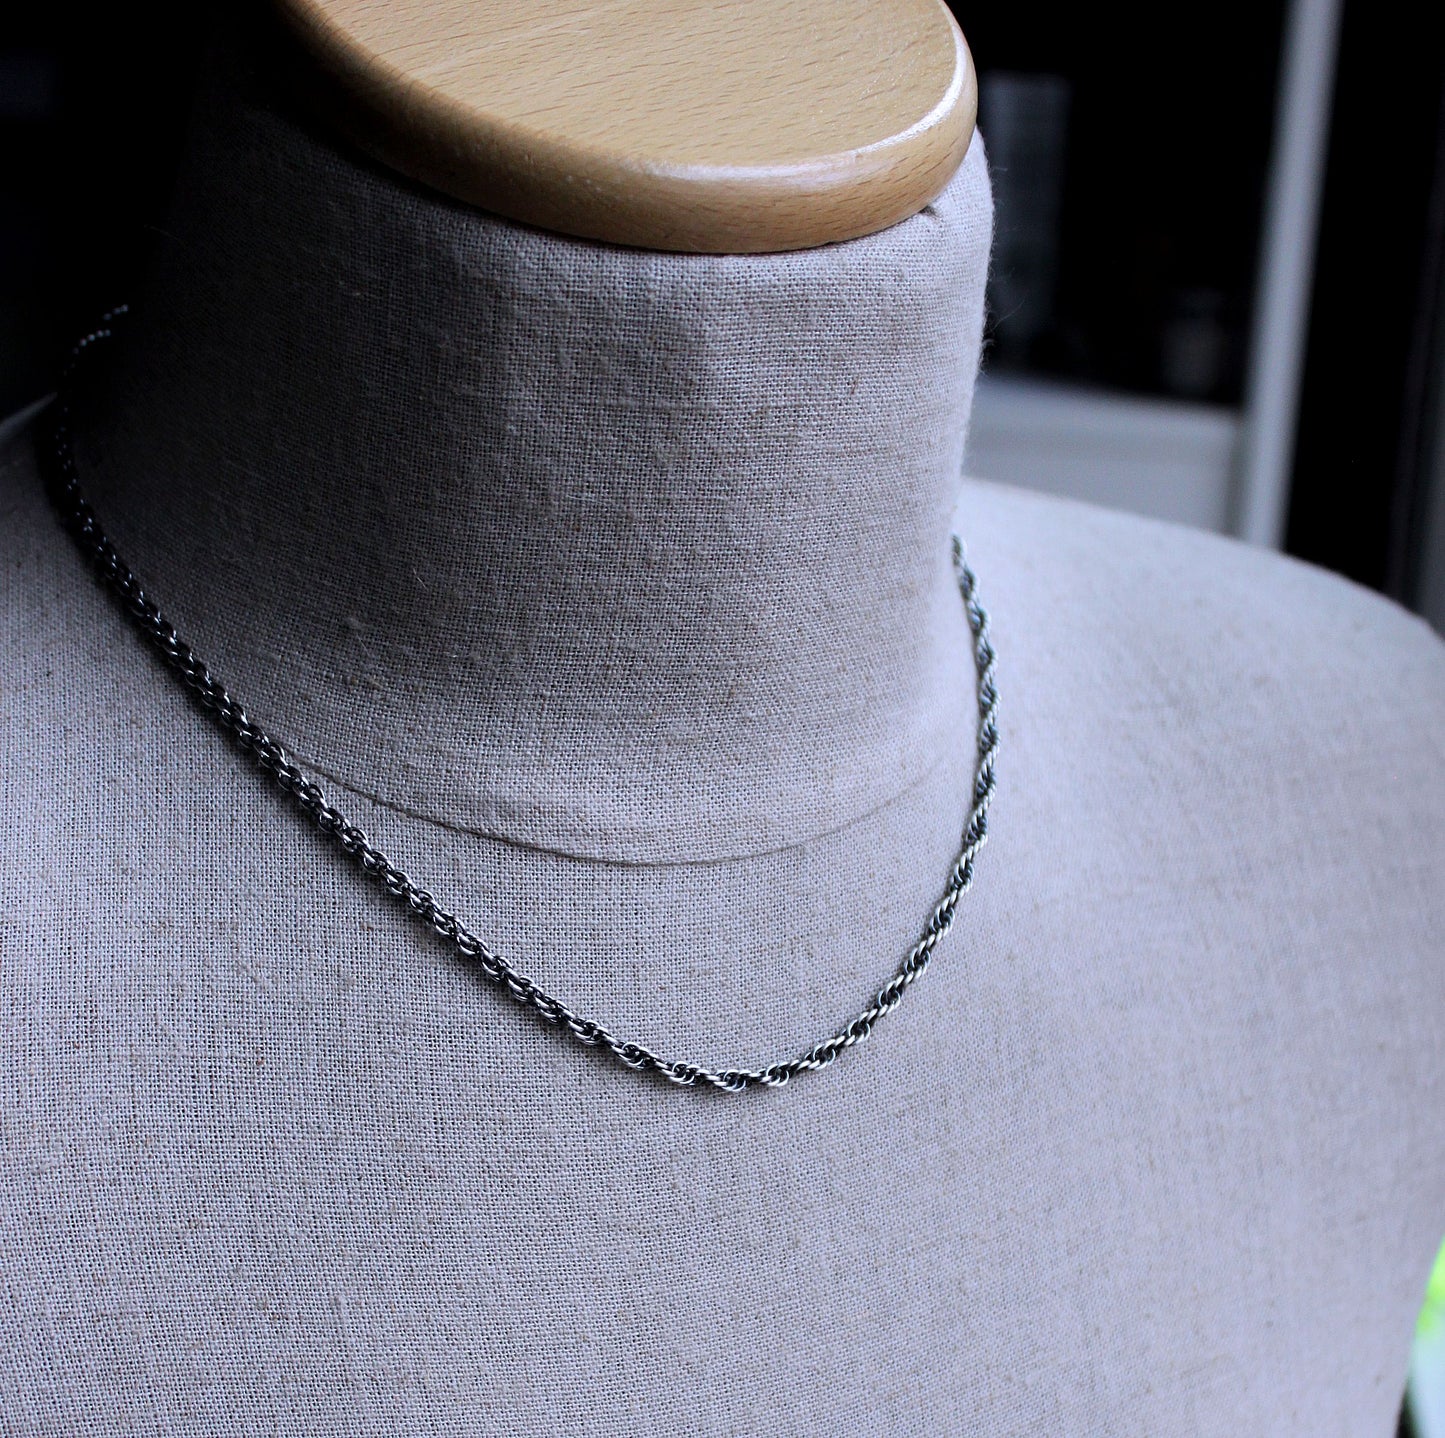 3.5mm Spiral Rope Chain Necklace